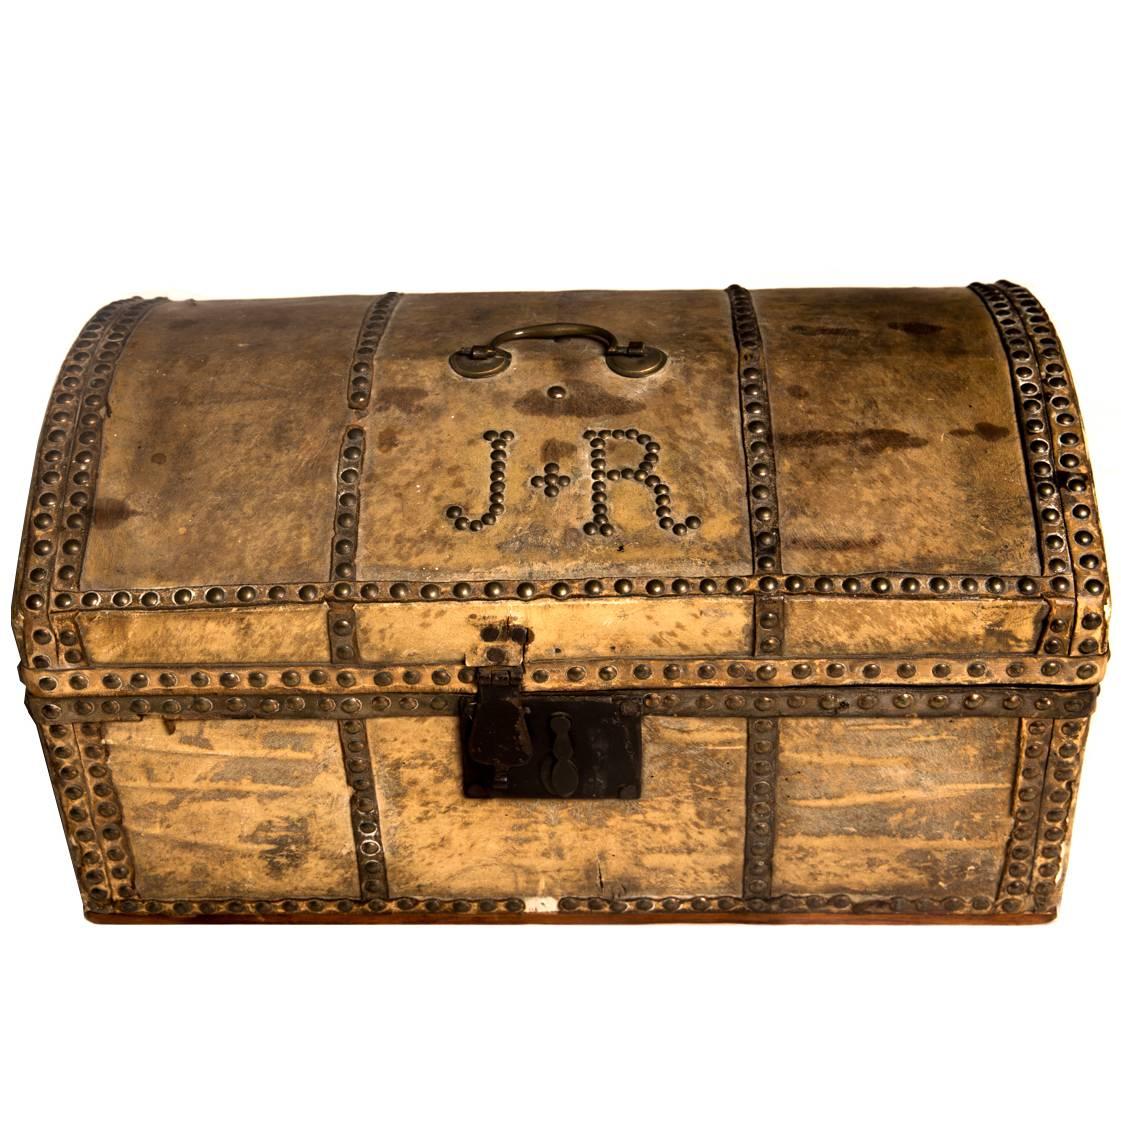 Charming King George I Pony Skin Coaching Trunk, Makers Label X2, 18th Century